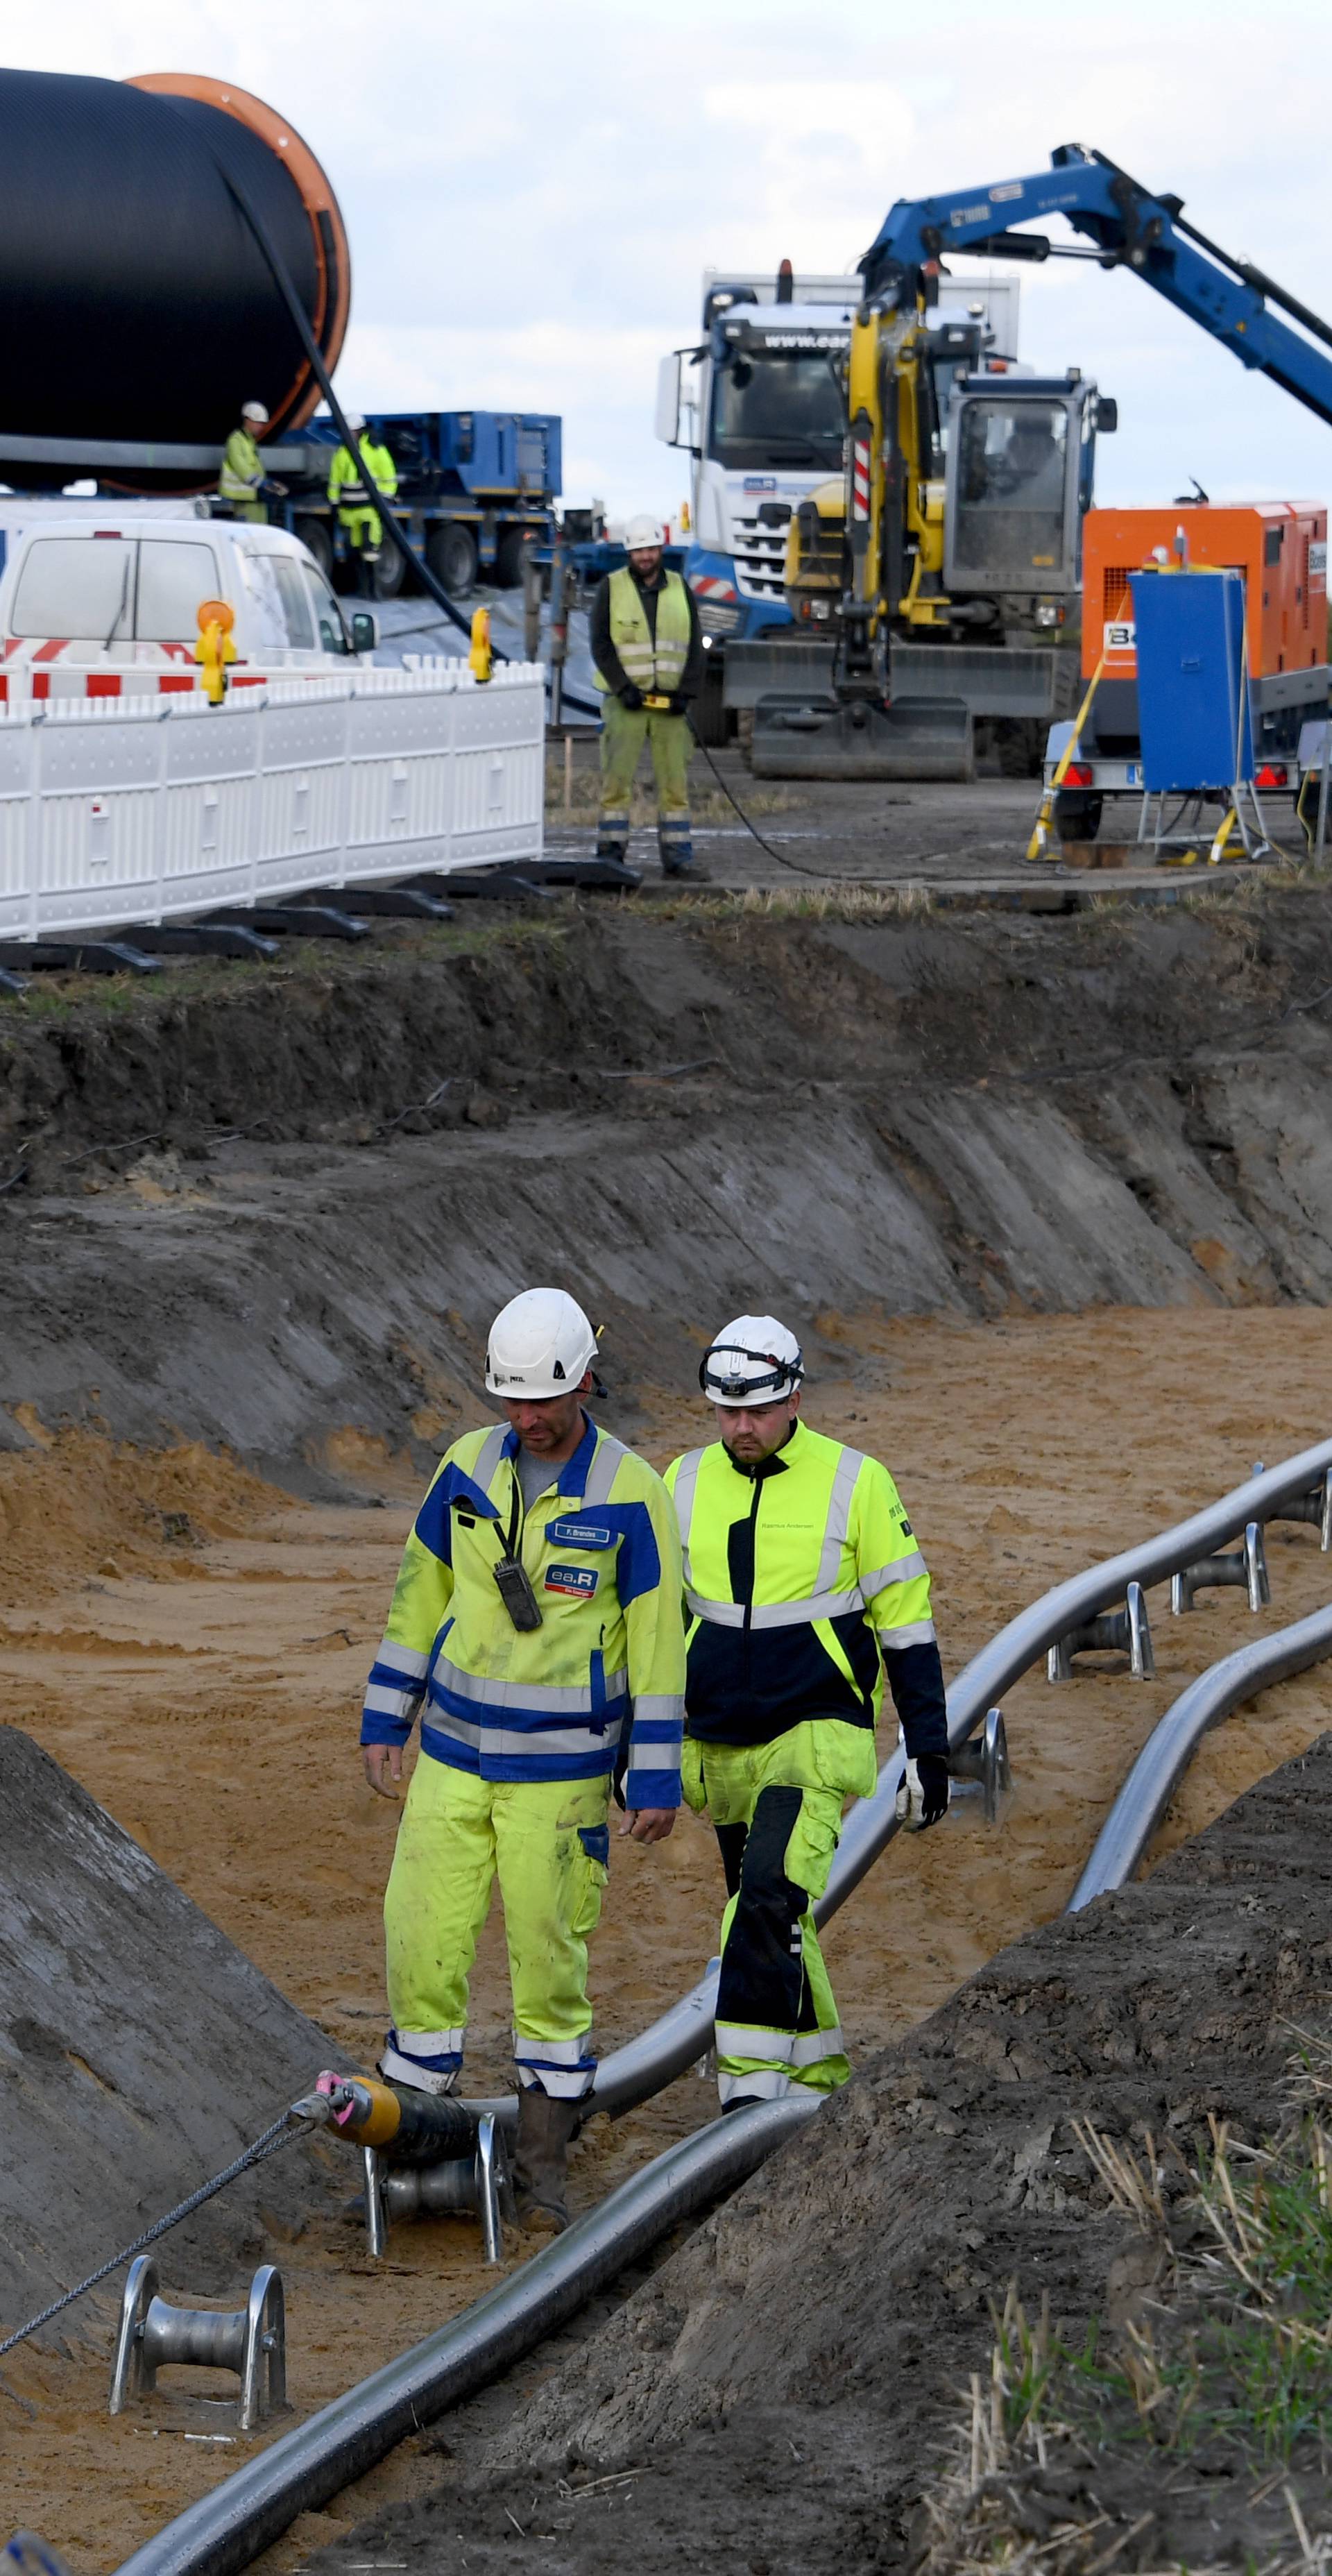 NordLink underground cable to be laid